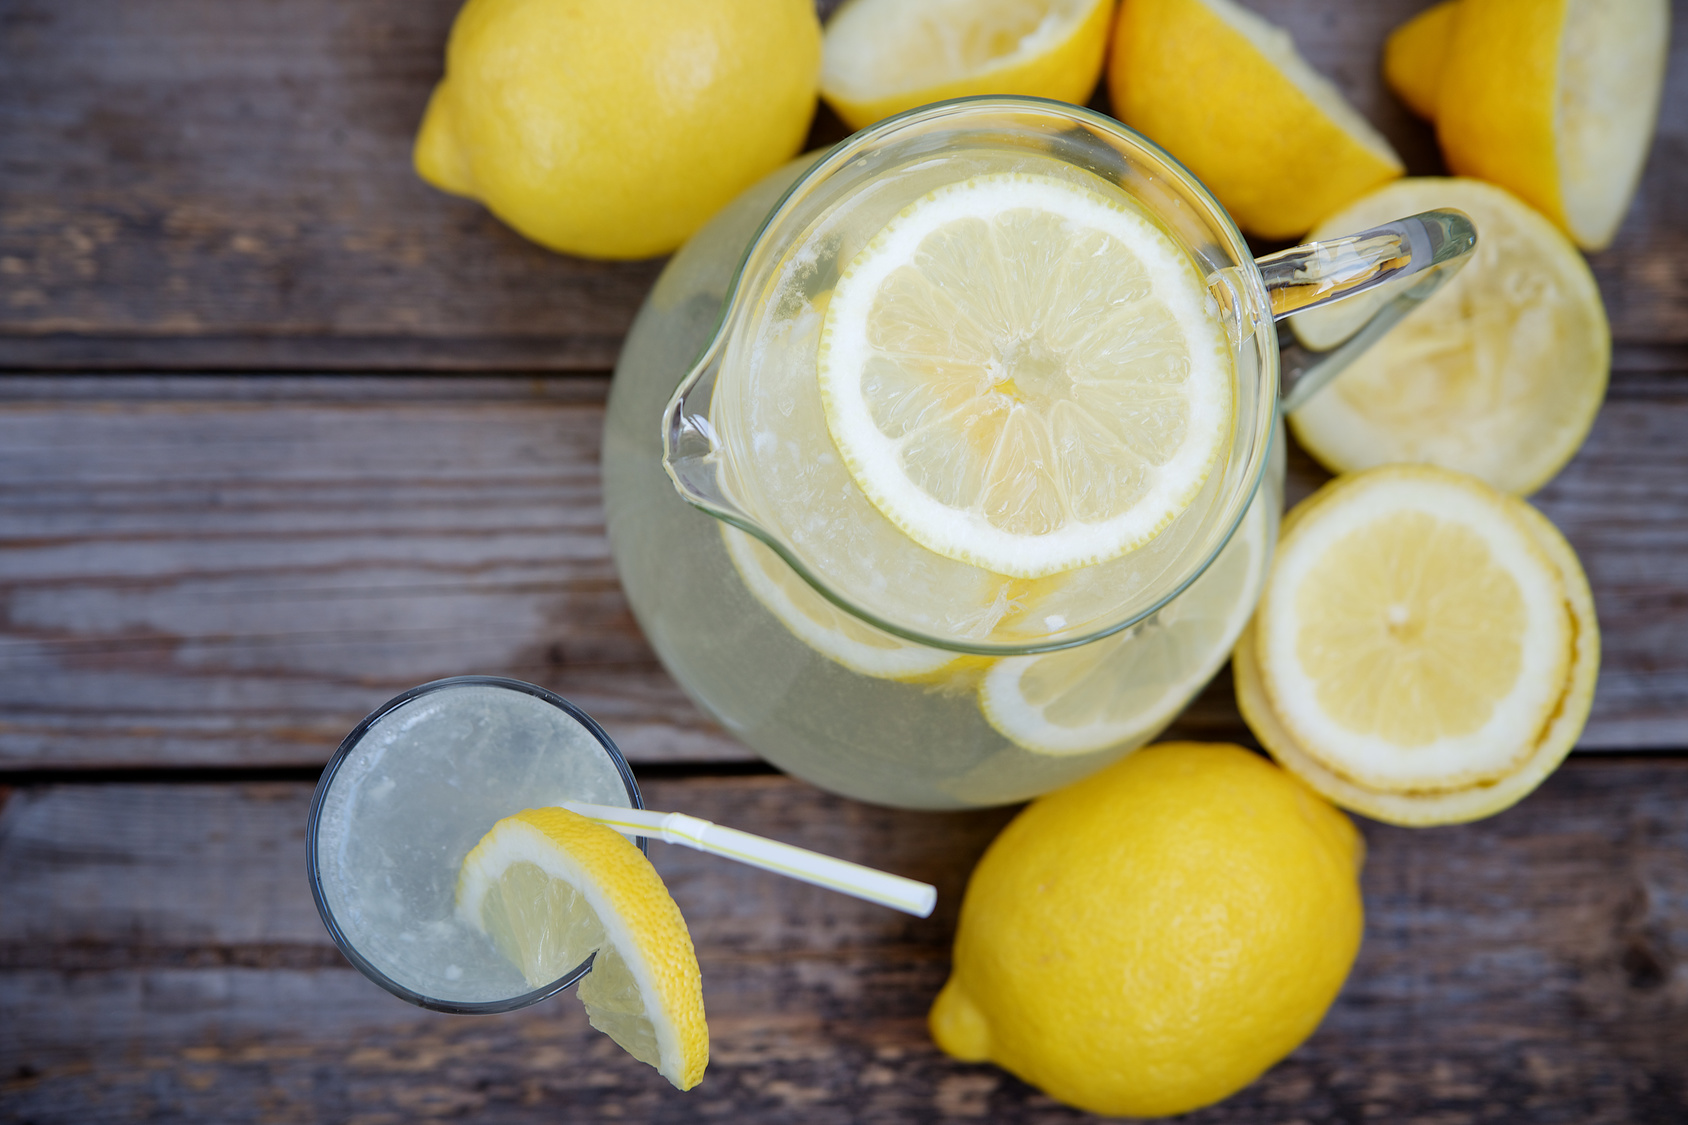 Pitcher of lemonade on a wooden background